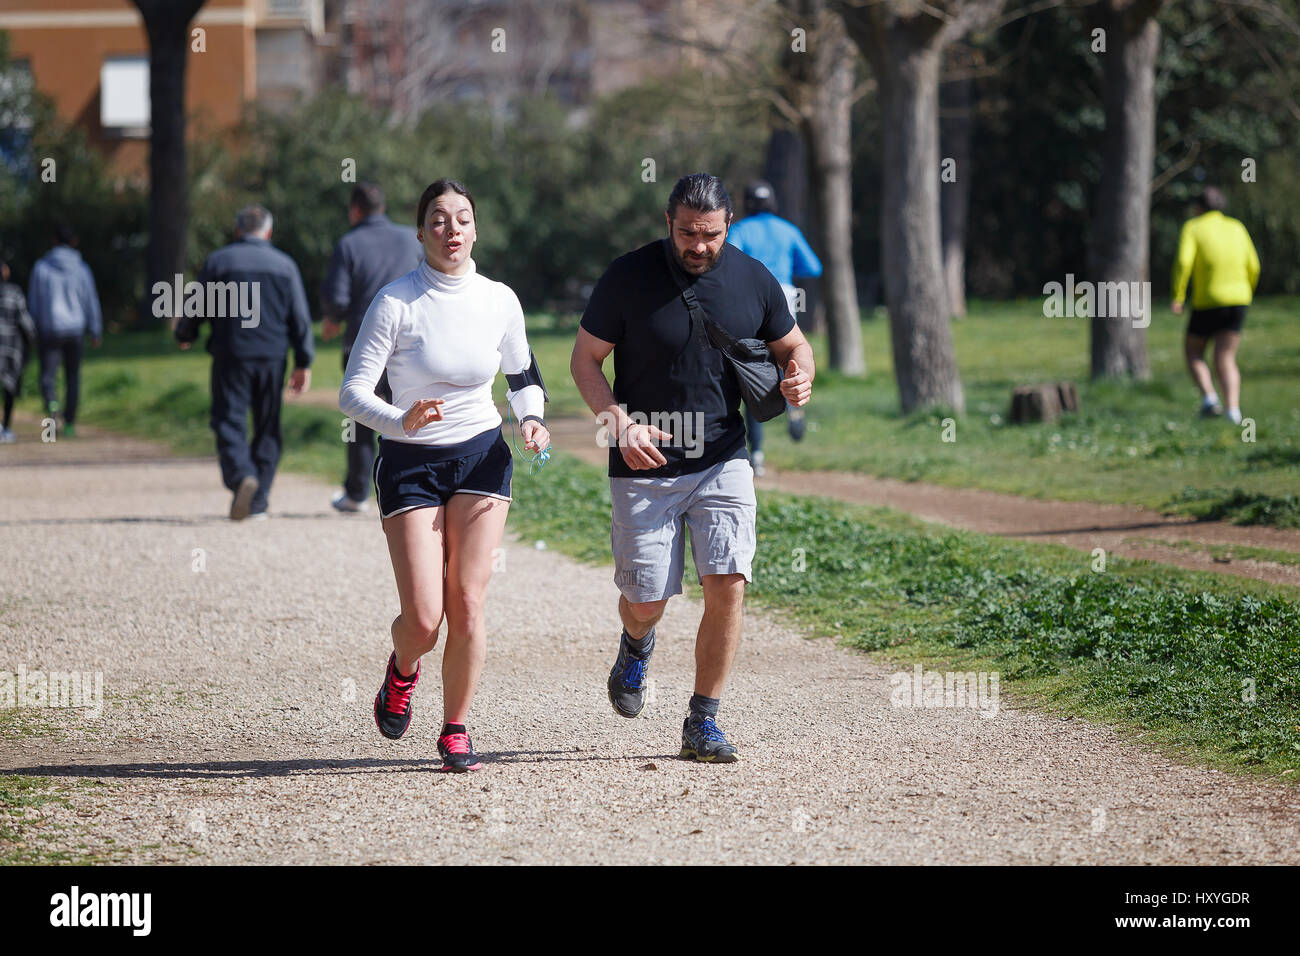 Rome, Italy - February 26, 2017: A man and a woman together are jogging in the park of Villa Gordiani, on a sunny spring day. Stock Photo